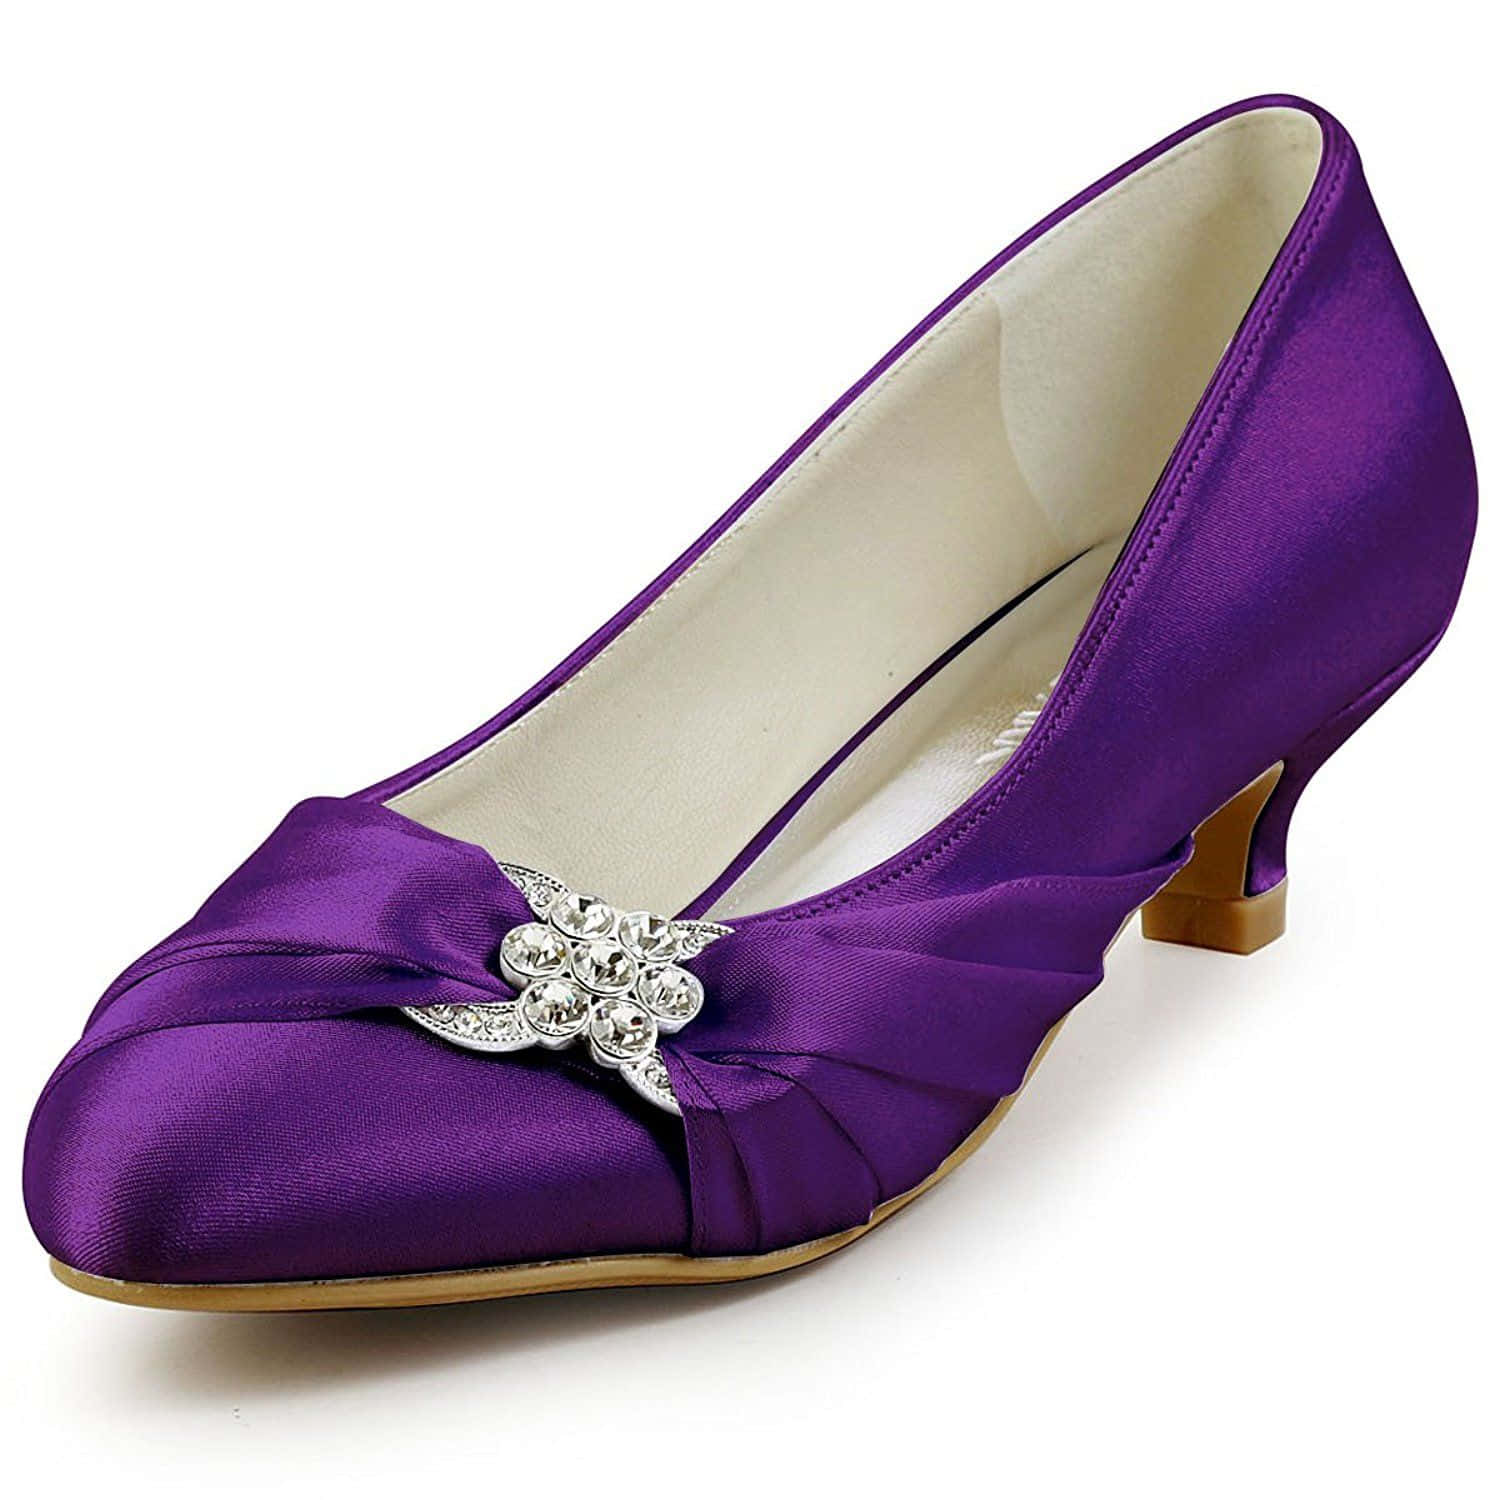 Look stylish in these adorable purple shoes! Wallpaper